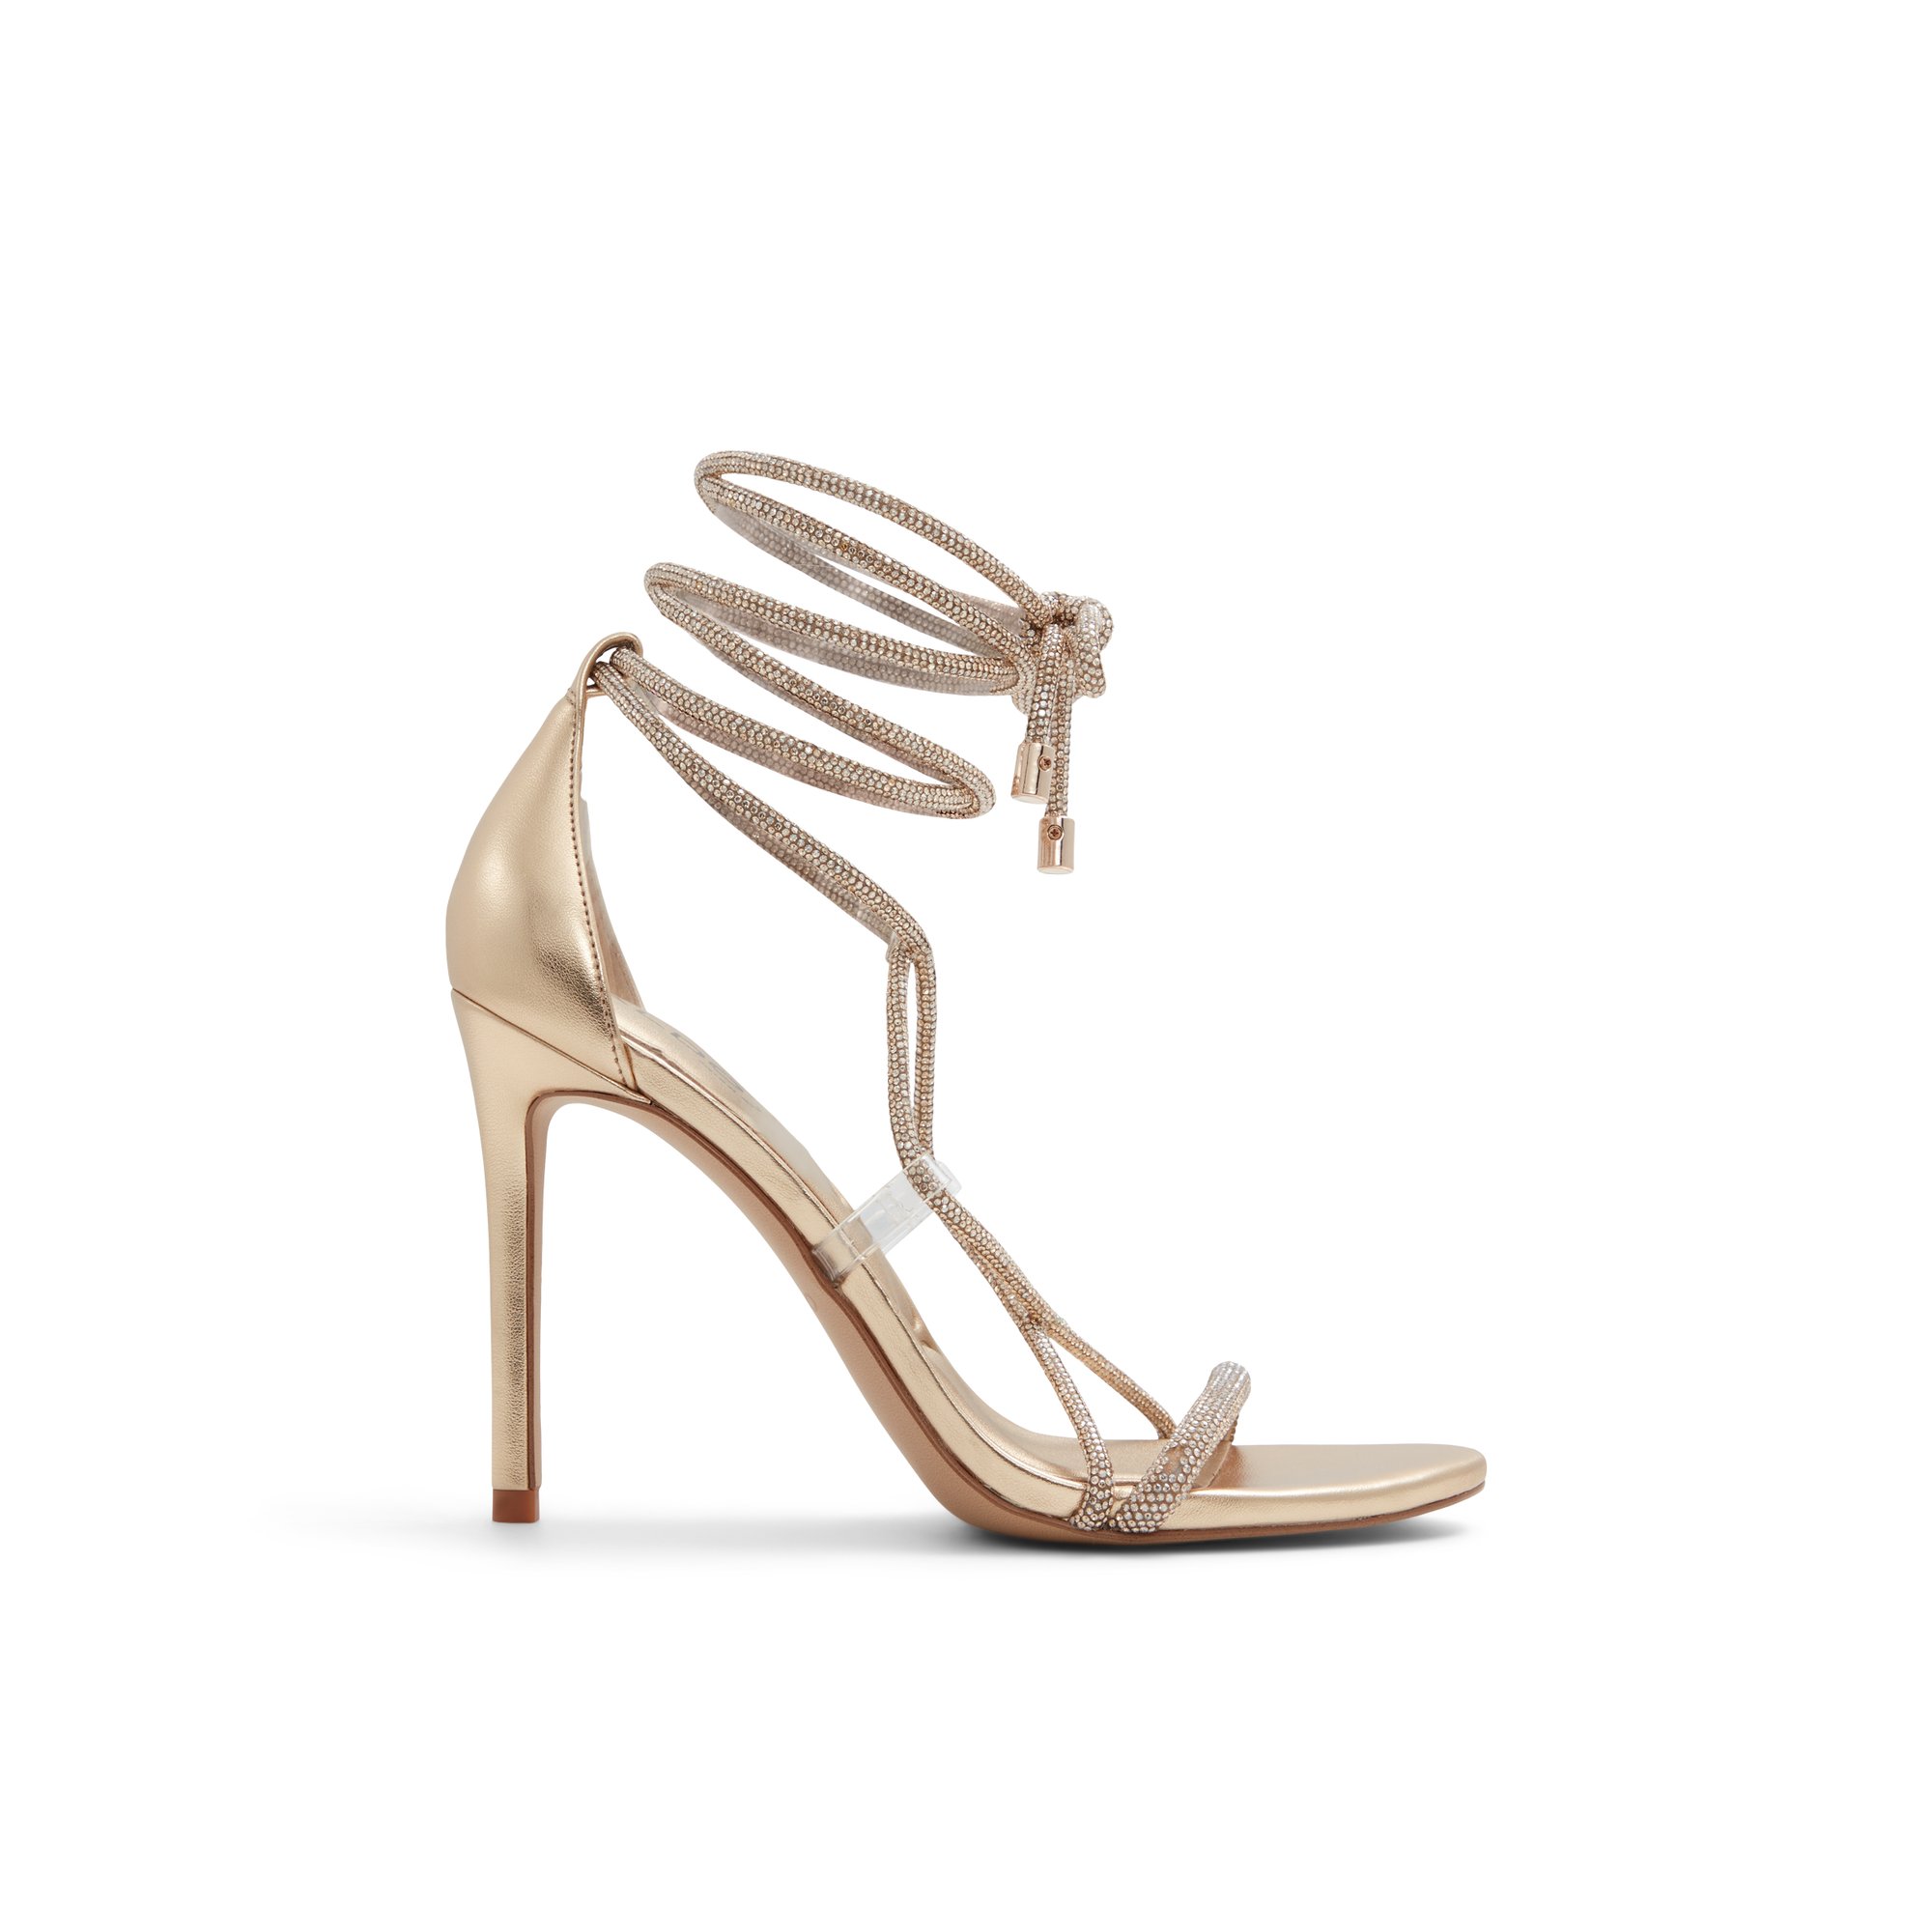 ALDO Marly - Women's Sandals Strappy - Gold